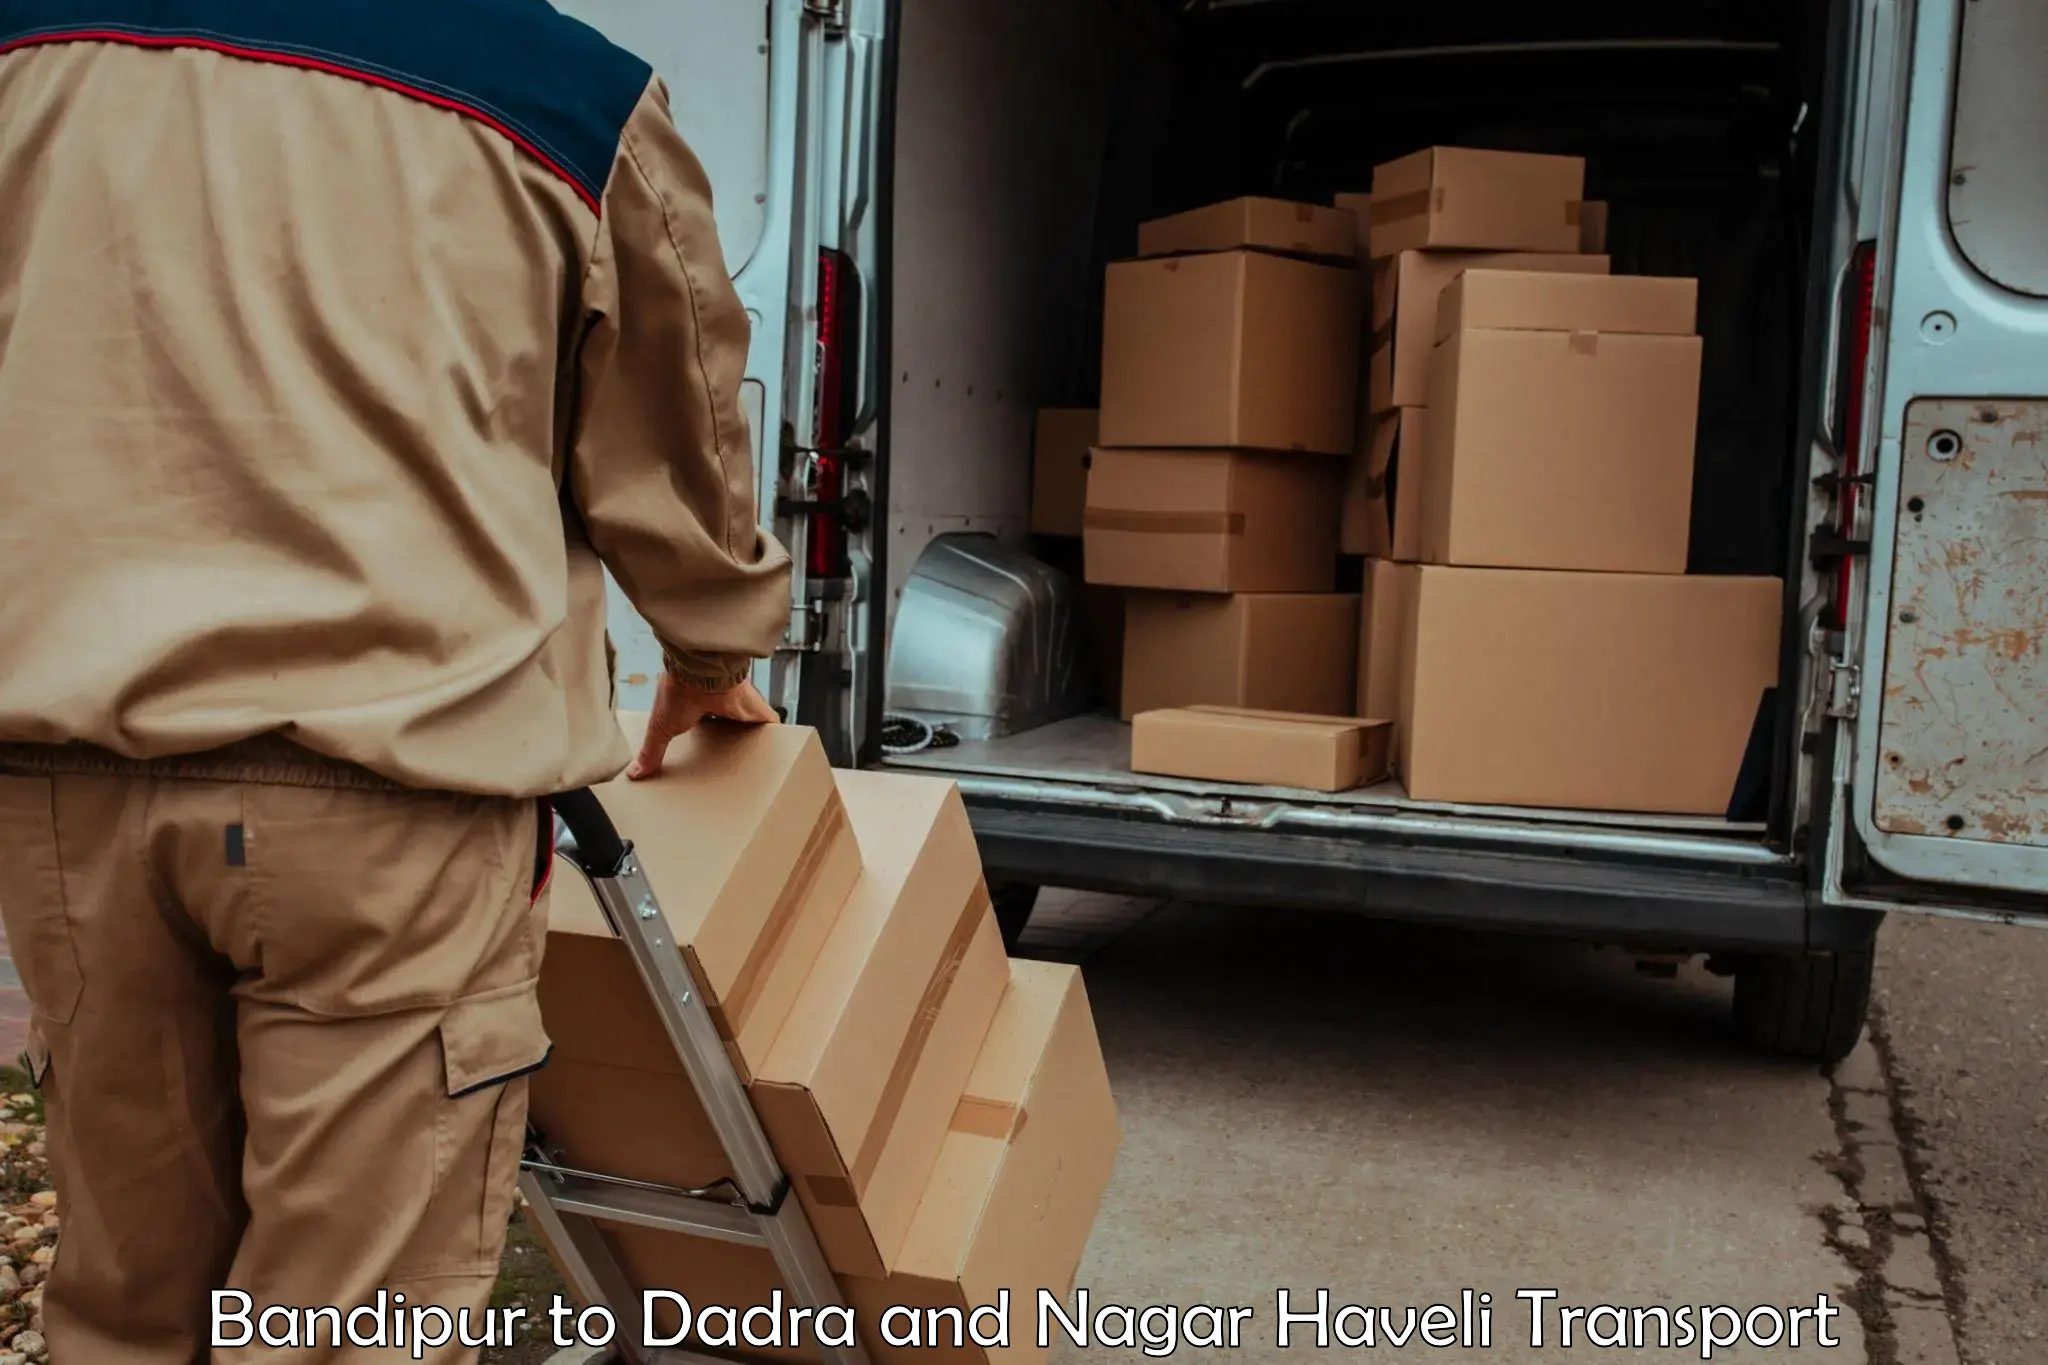 Daily parcel service transport Bandipur to Dadra and Nagar Haveli